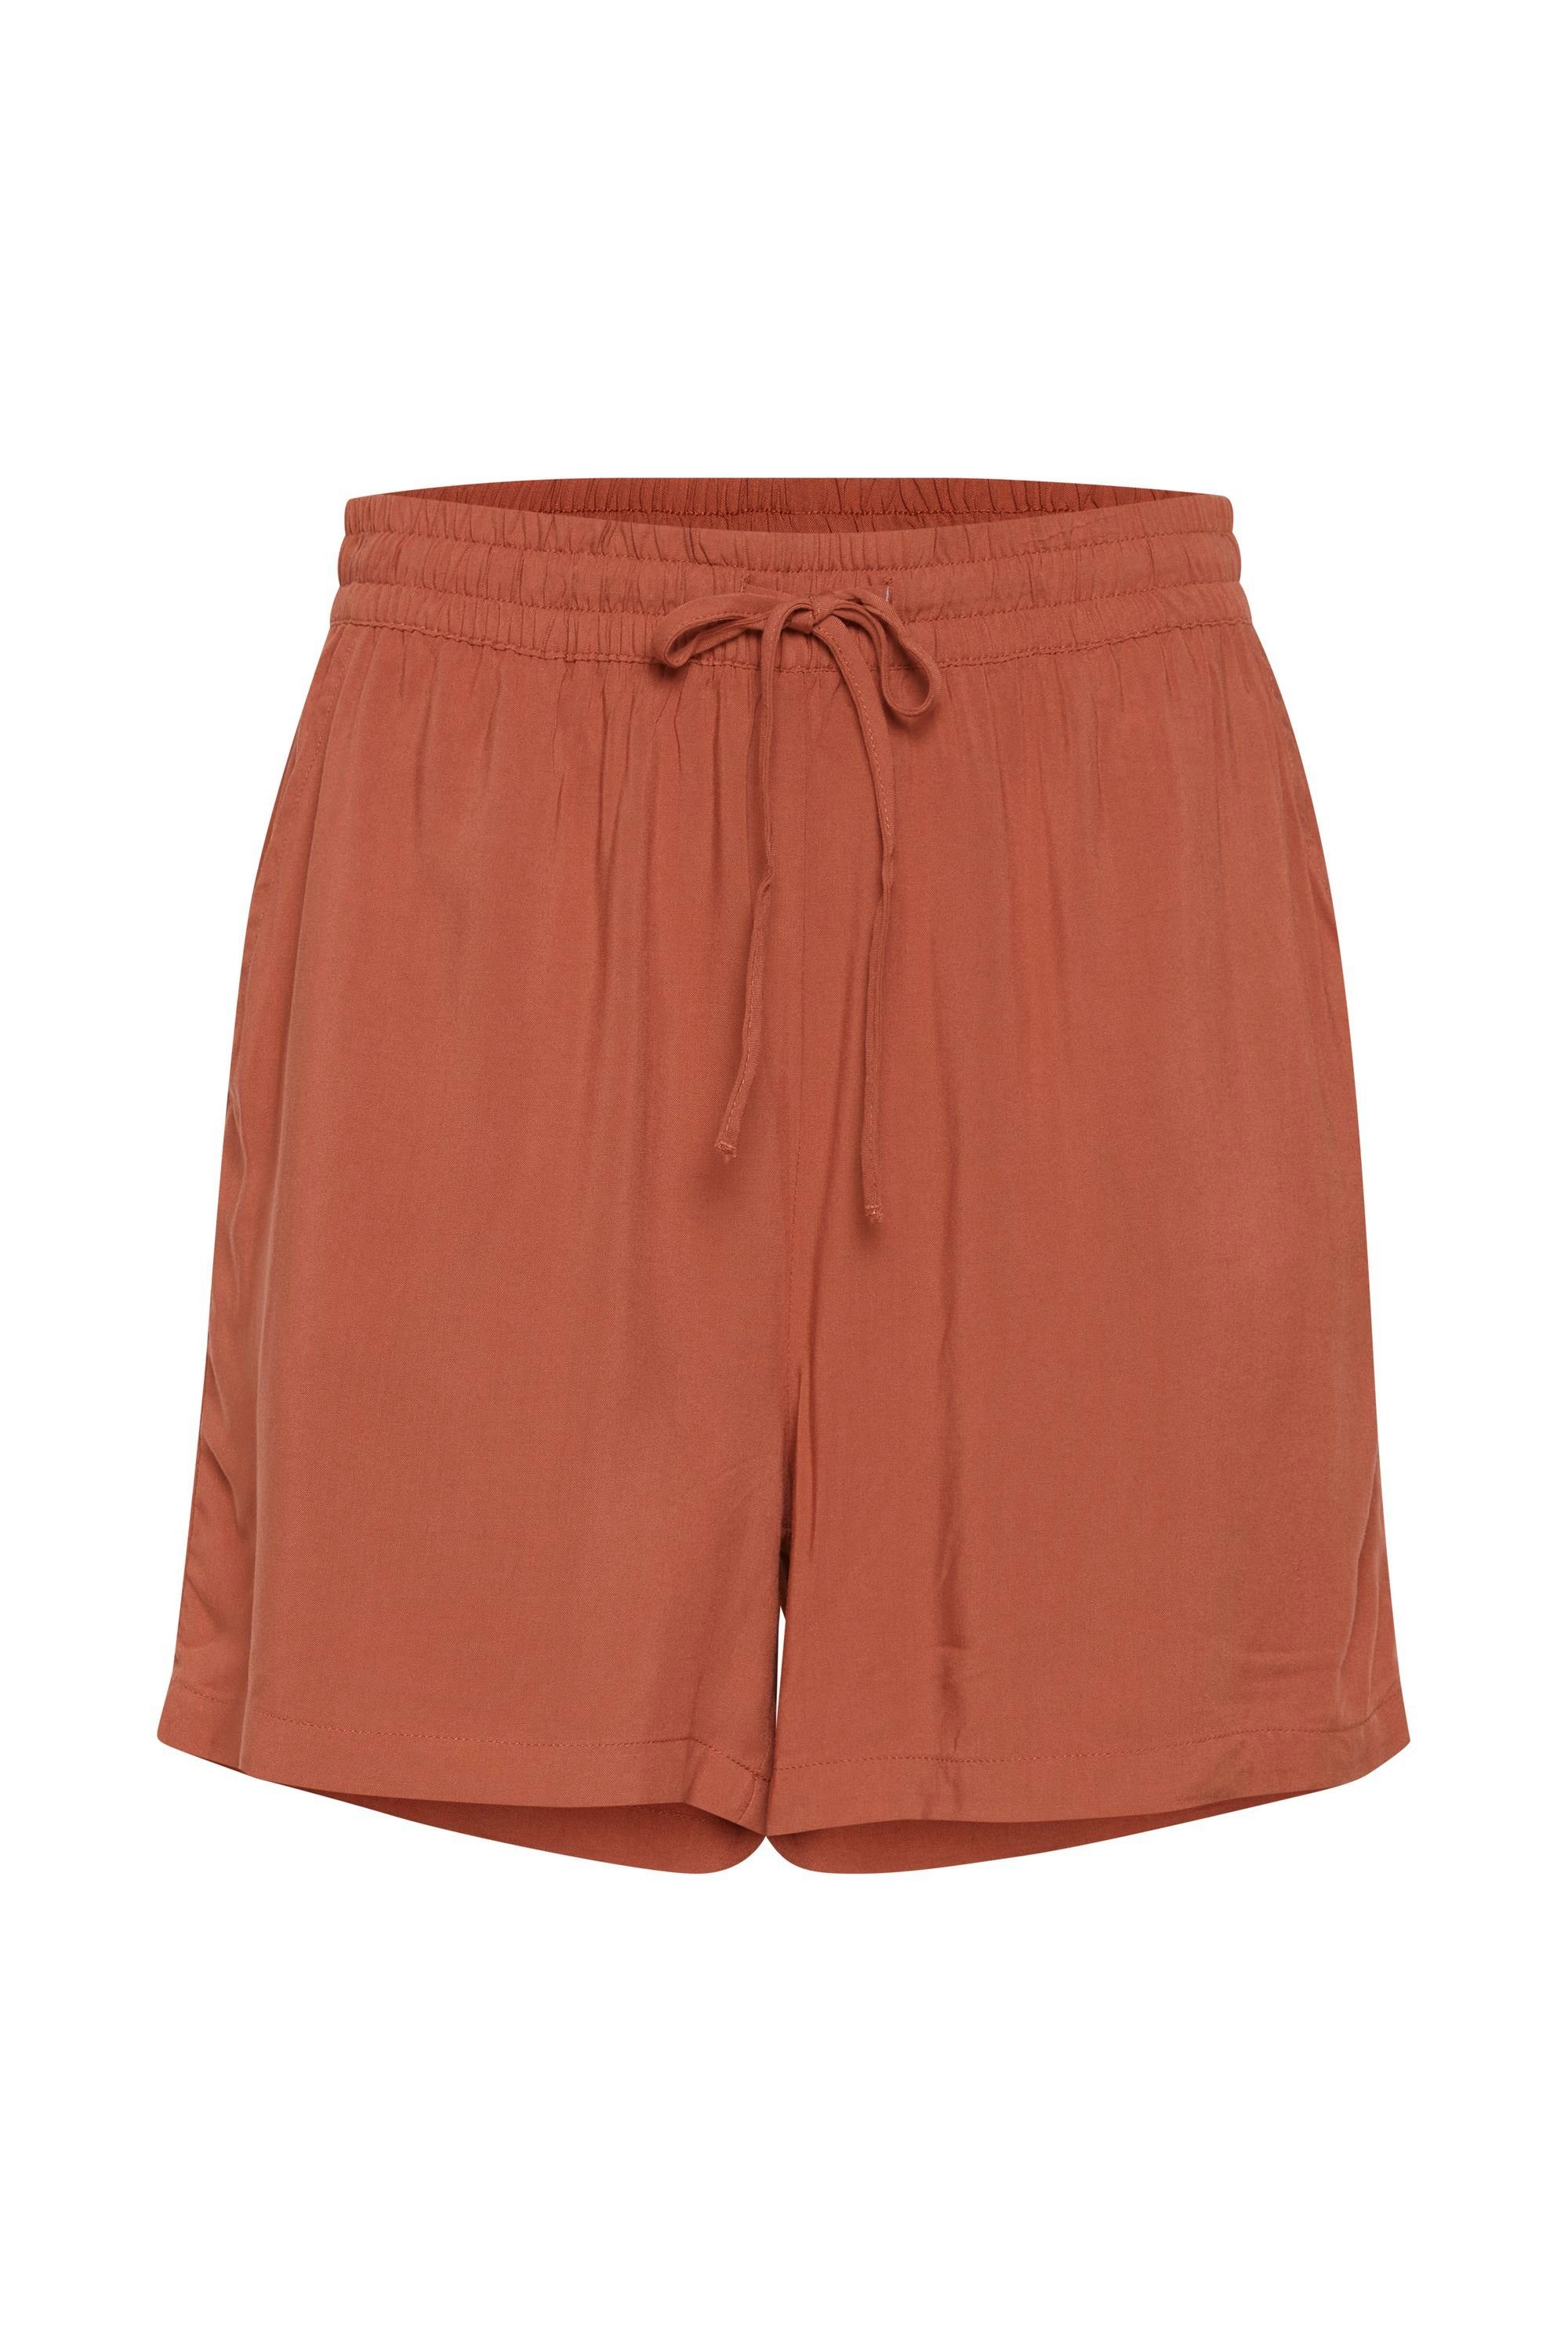 b.young Shorts BYMMJOELLA Shorts Red Etruscan 20809730 Muster (181434) - Luftige mit SHORTS